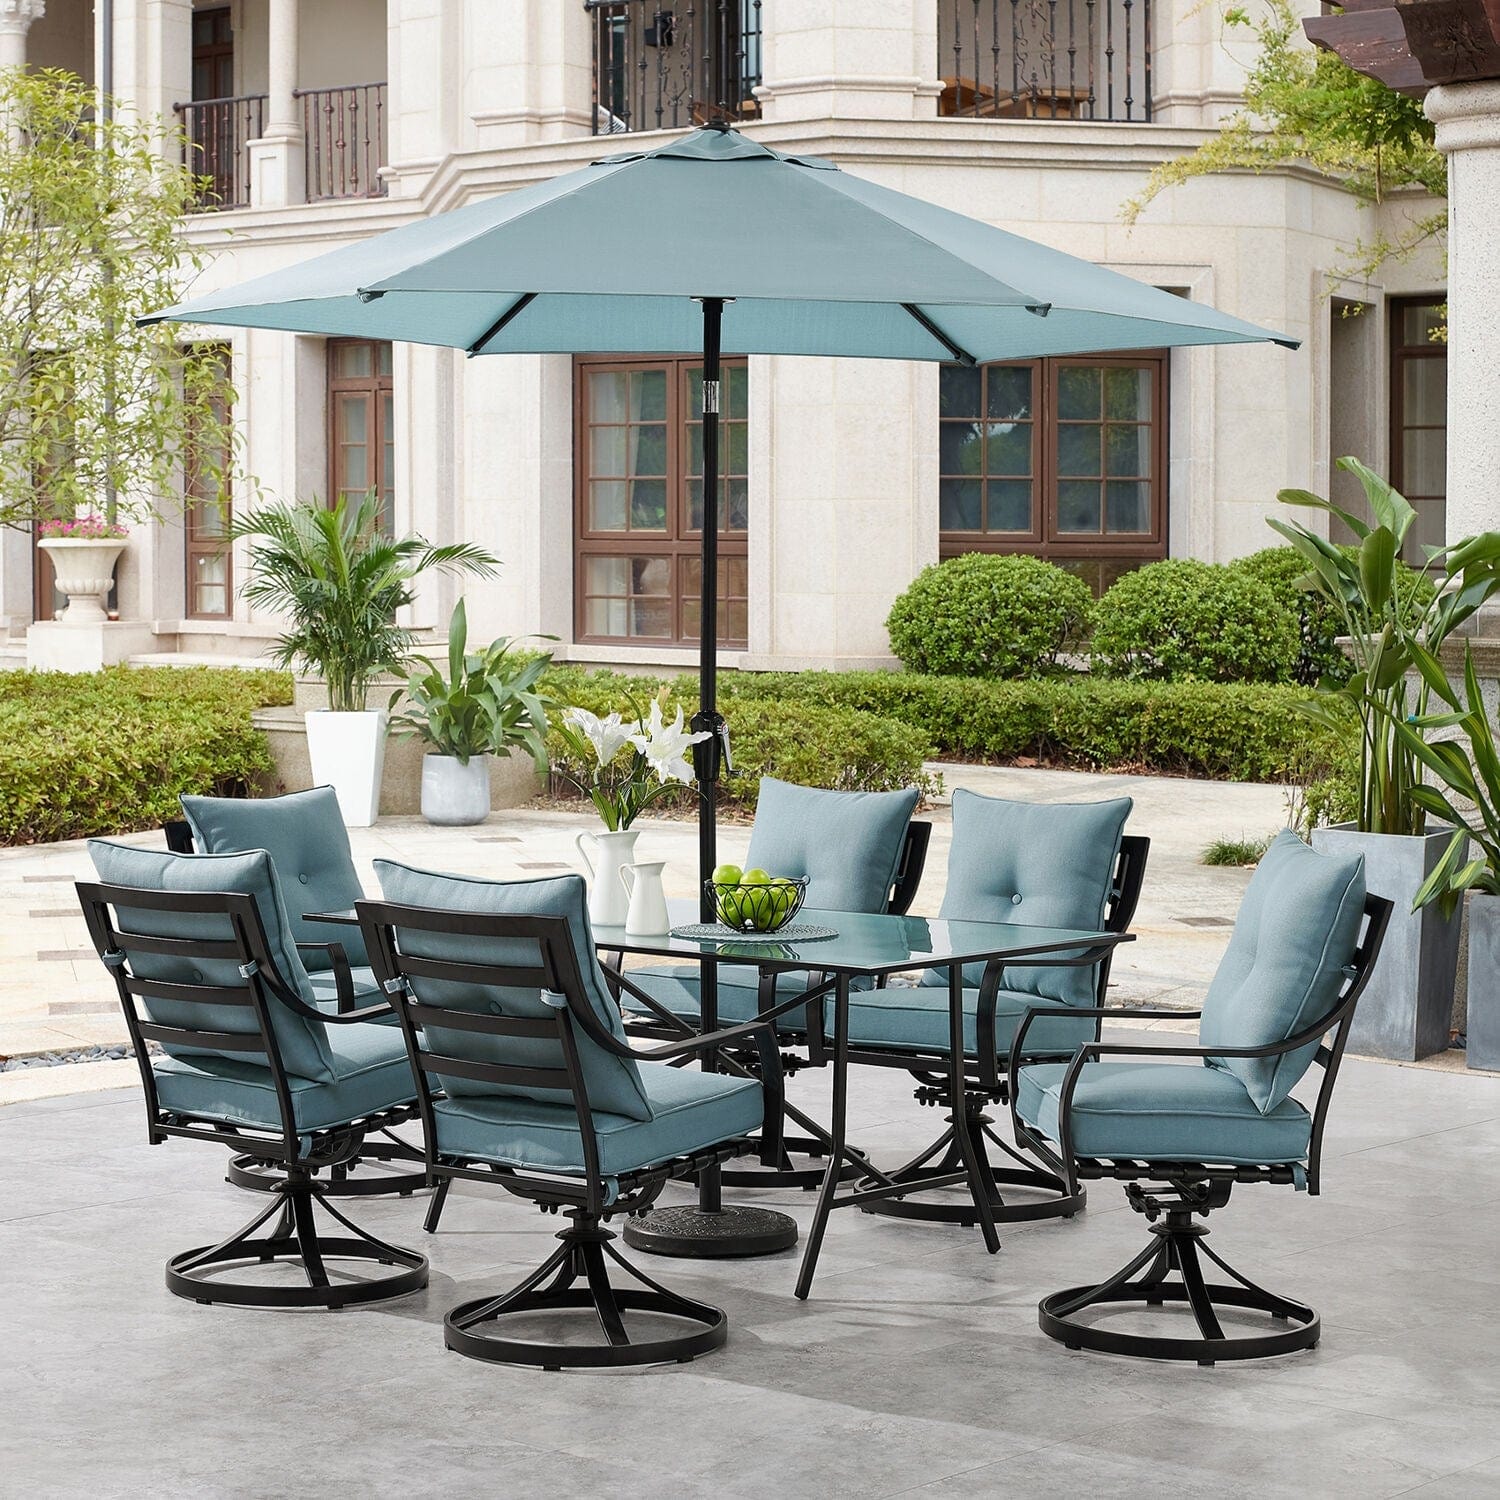 Hanover Outdoor Dining Set Hanover Lavallette 7-Piece Dining Set in Ocean Blue with 6 Swivel Rockers, 66" x 38" Glass-Top Table, Umbrella, and Base - LAVDN7PCSW-BLU-SU